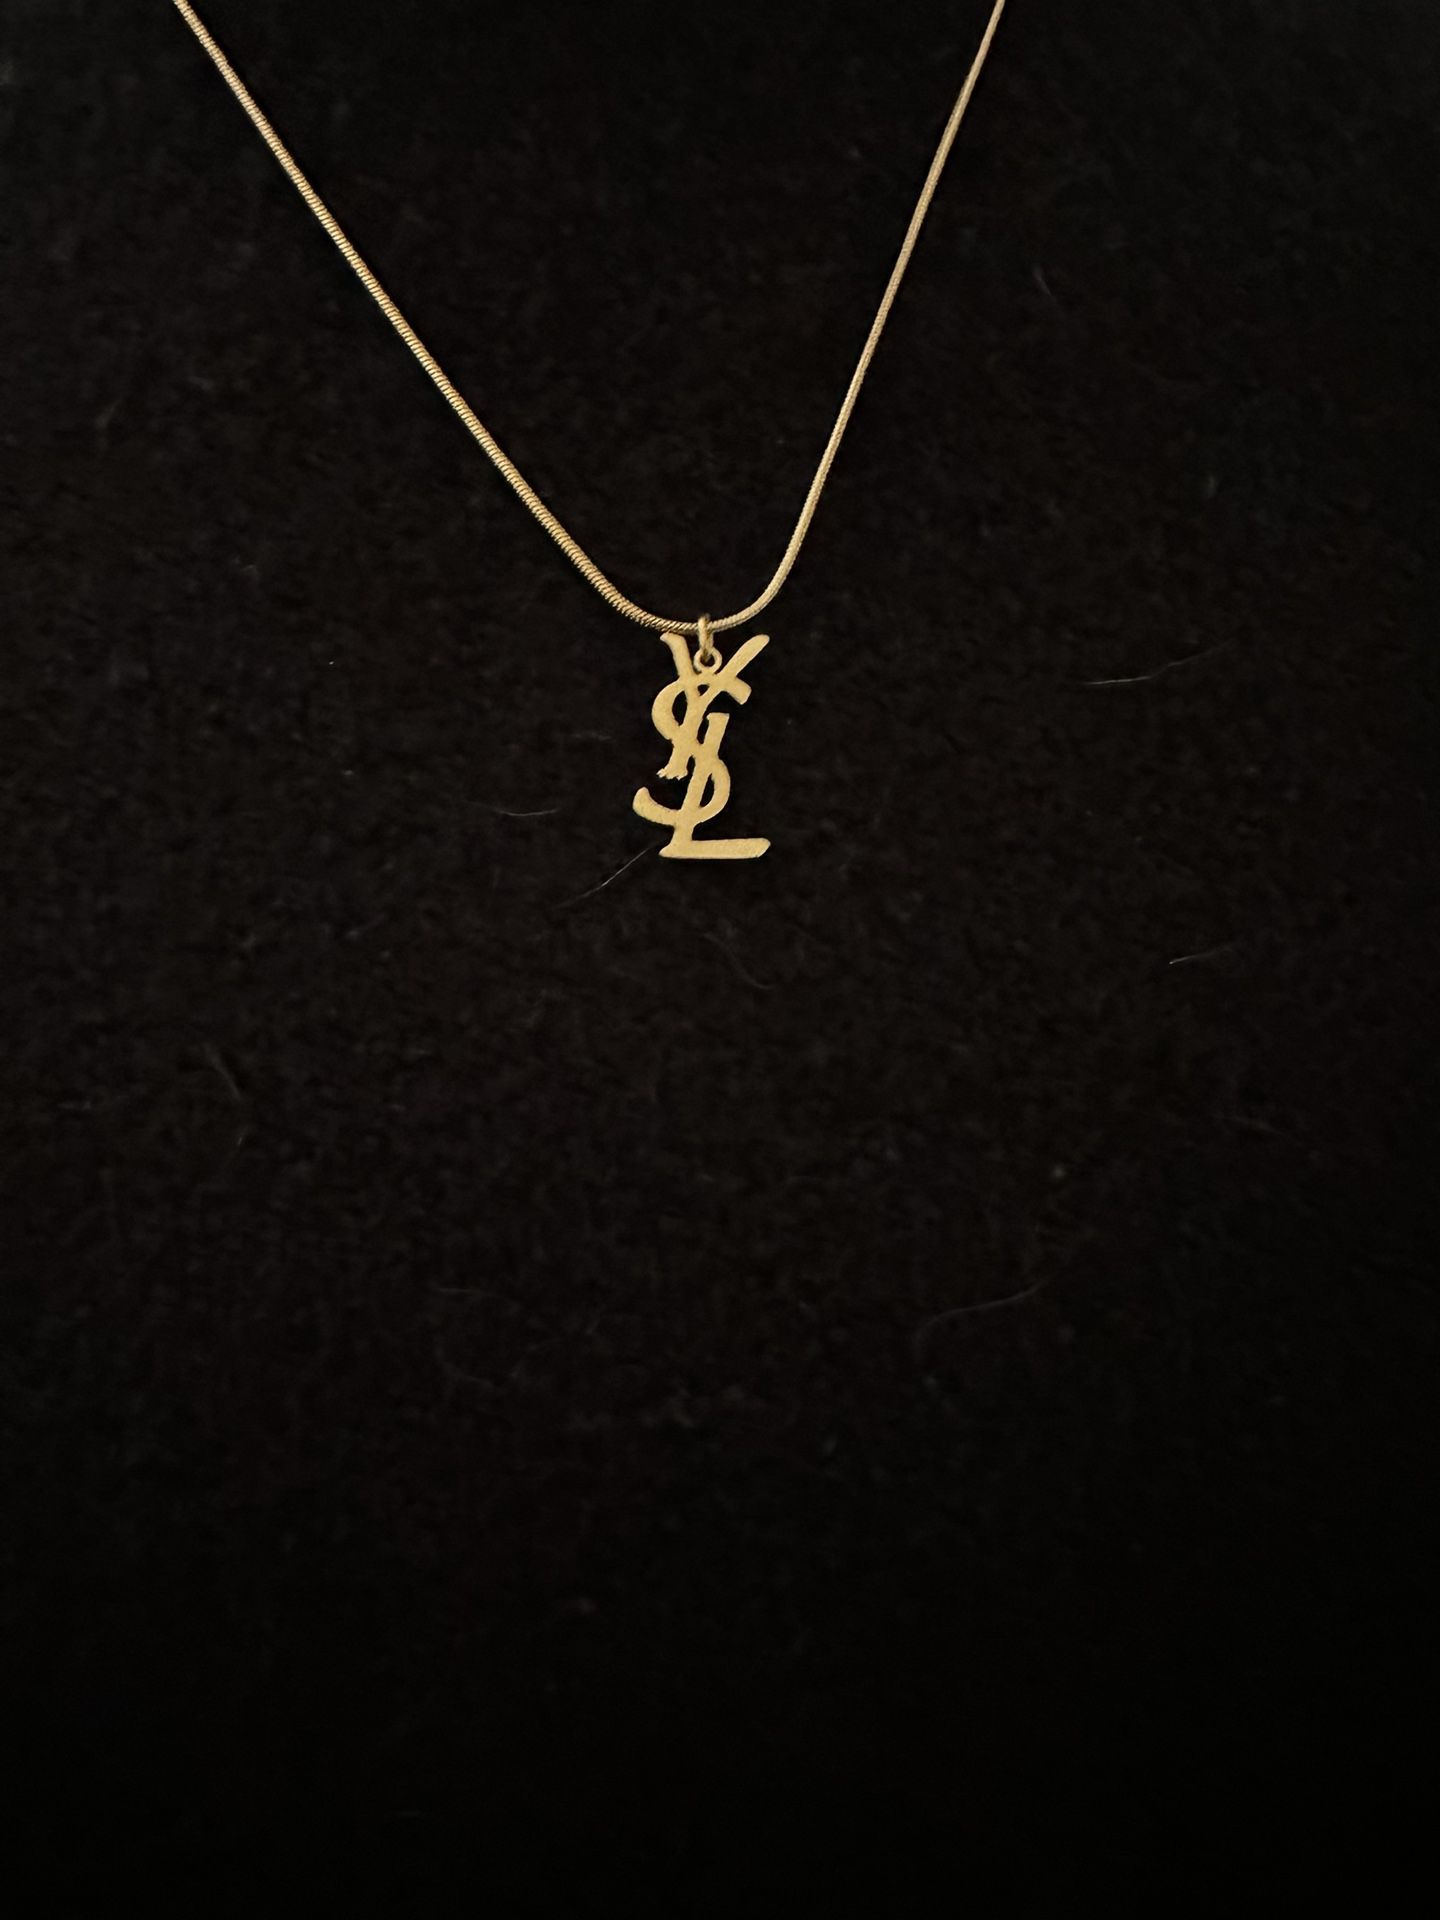 YSL  pendant necklace in polished gold